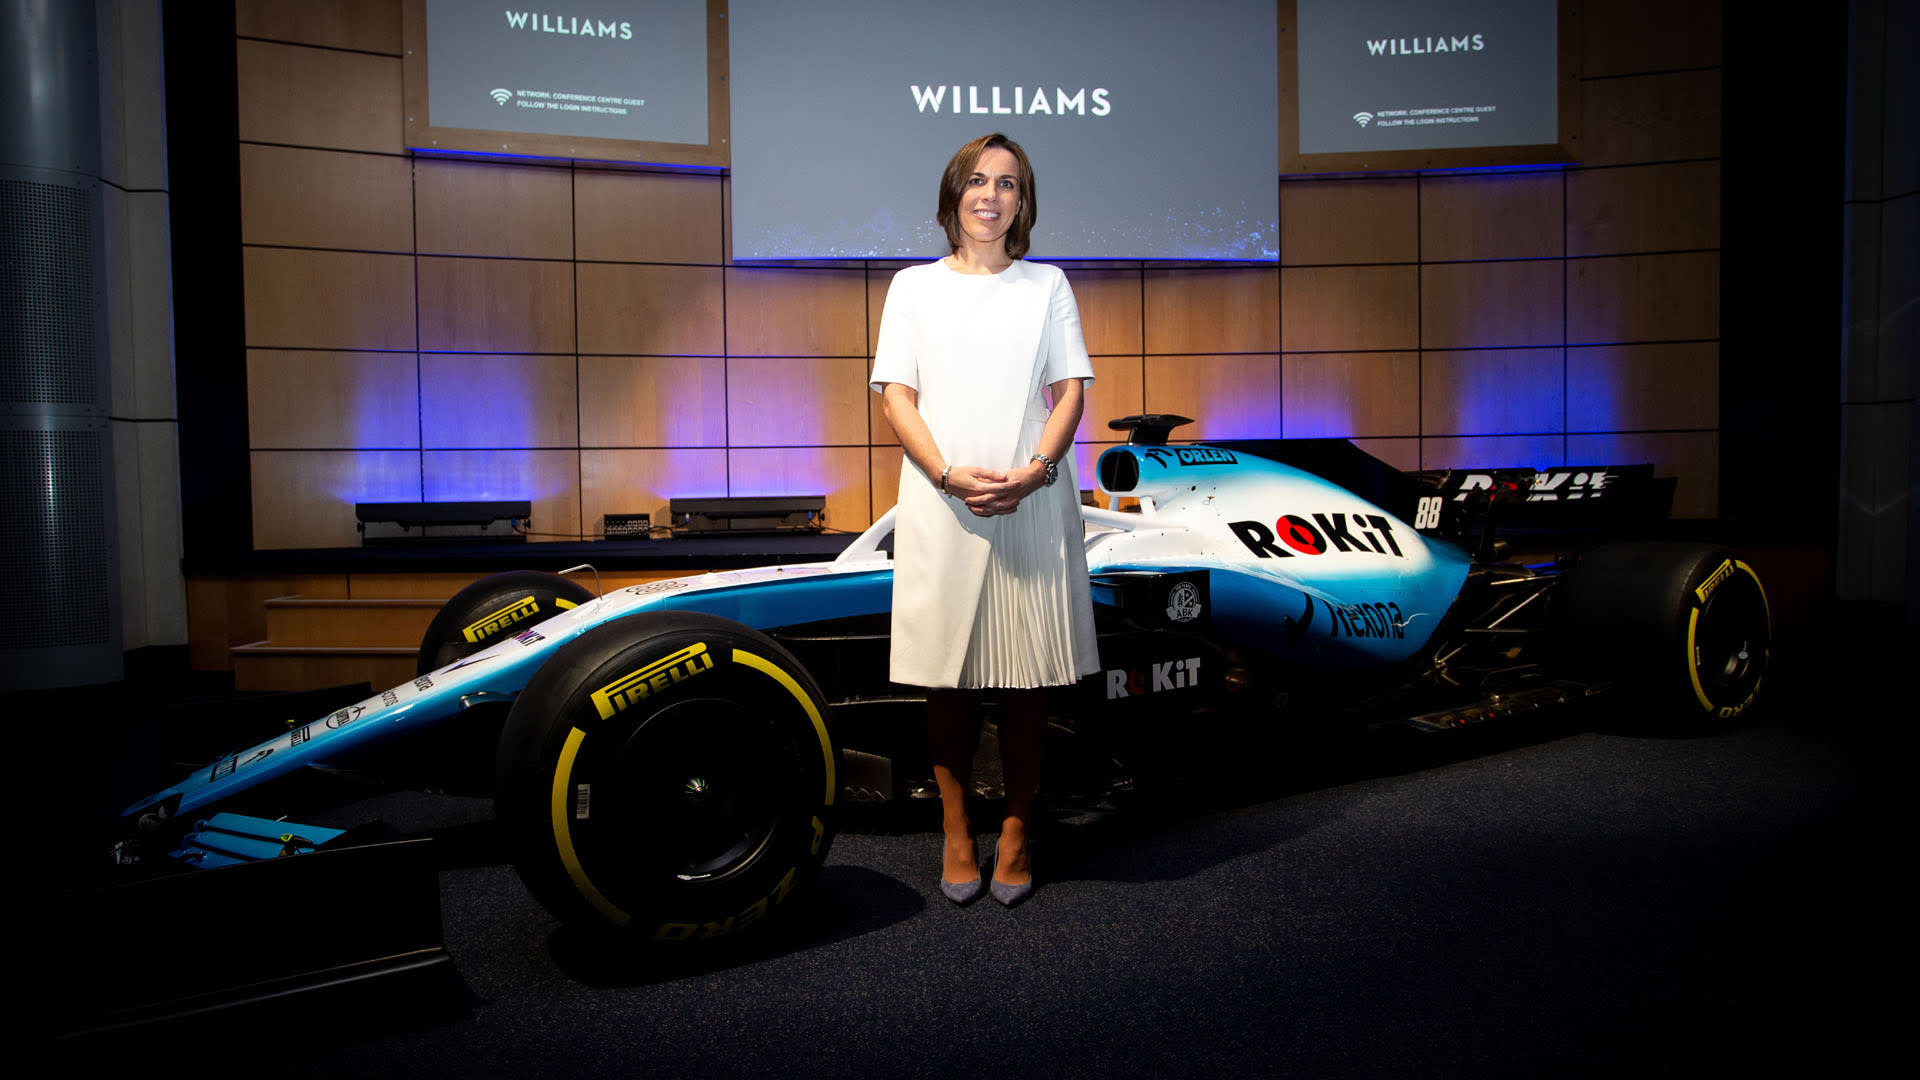 How a 45-minute talk and a bottle of sauce helped Williams secure a new title sponsor ...1920 x 1080